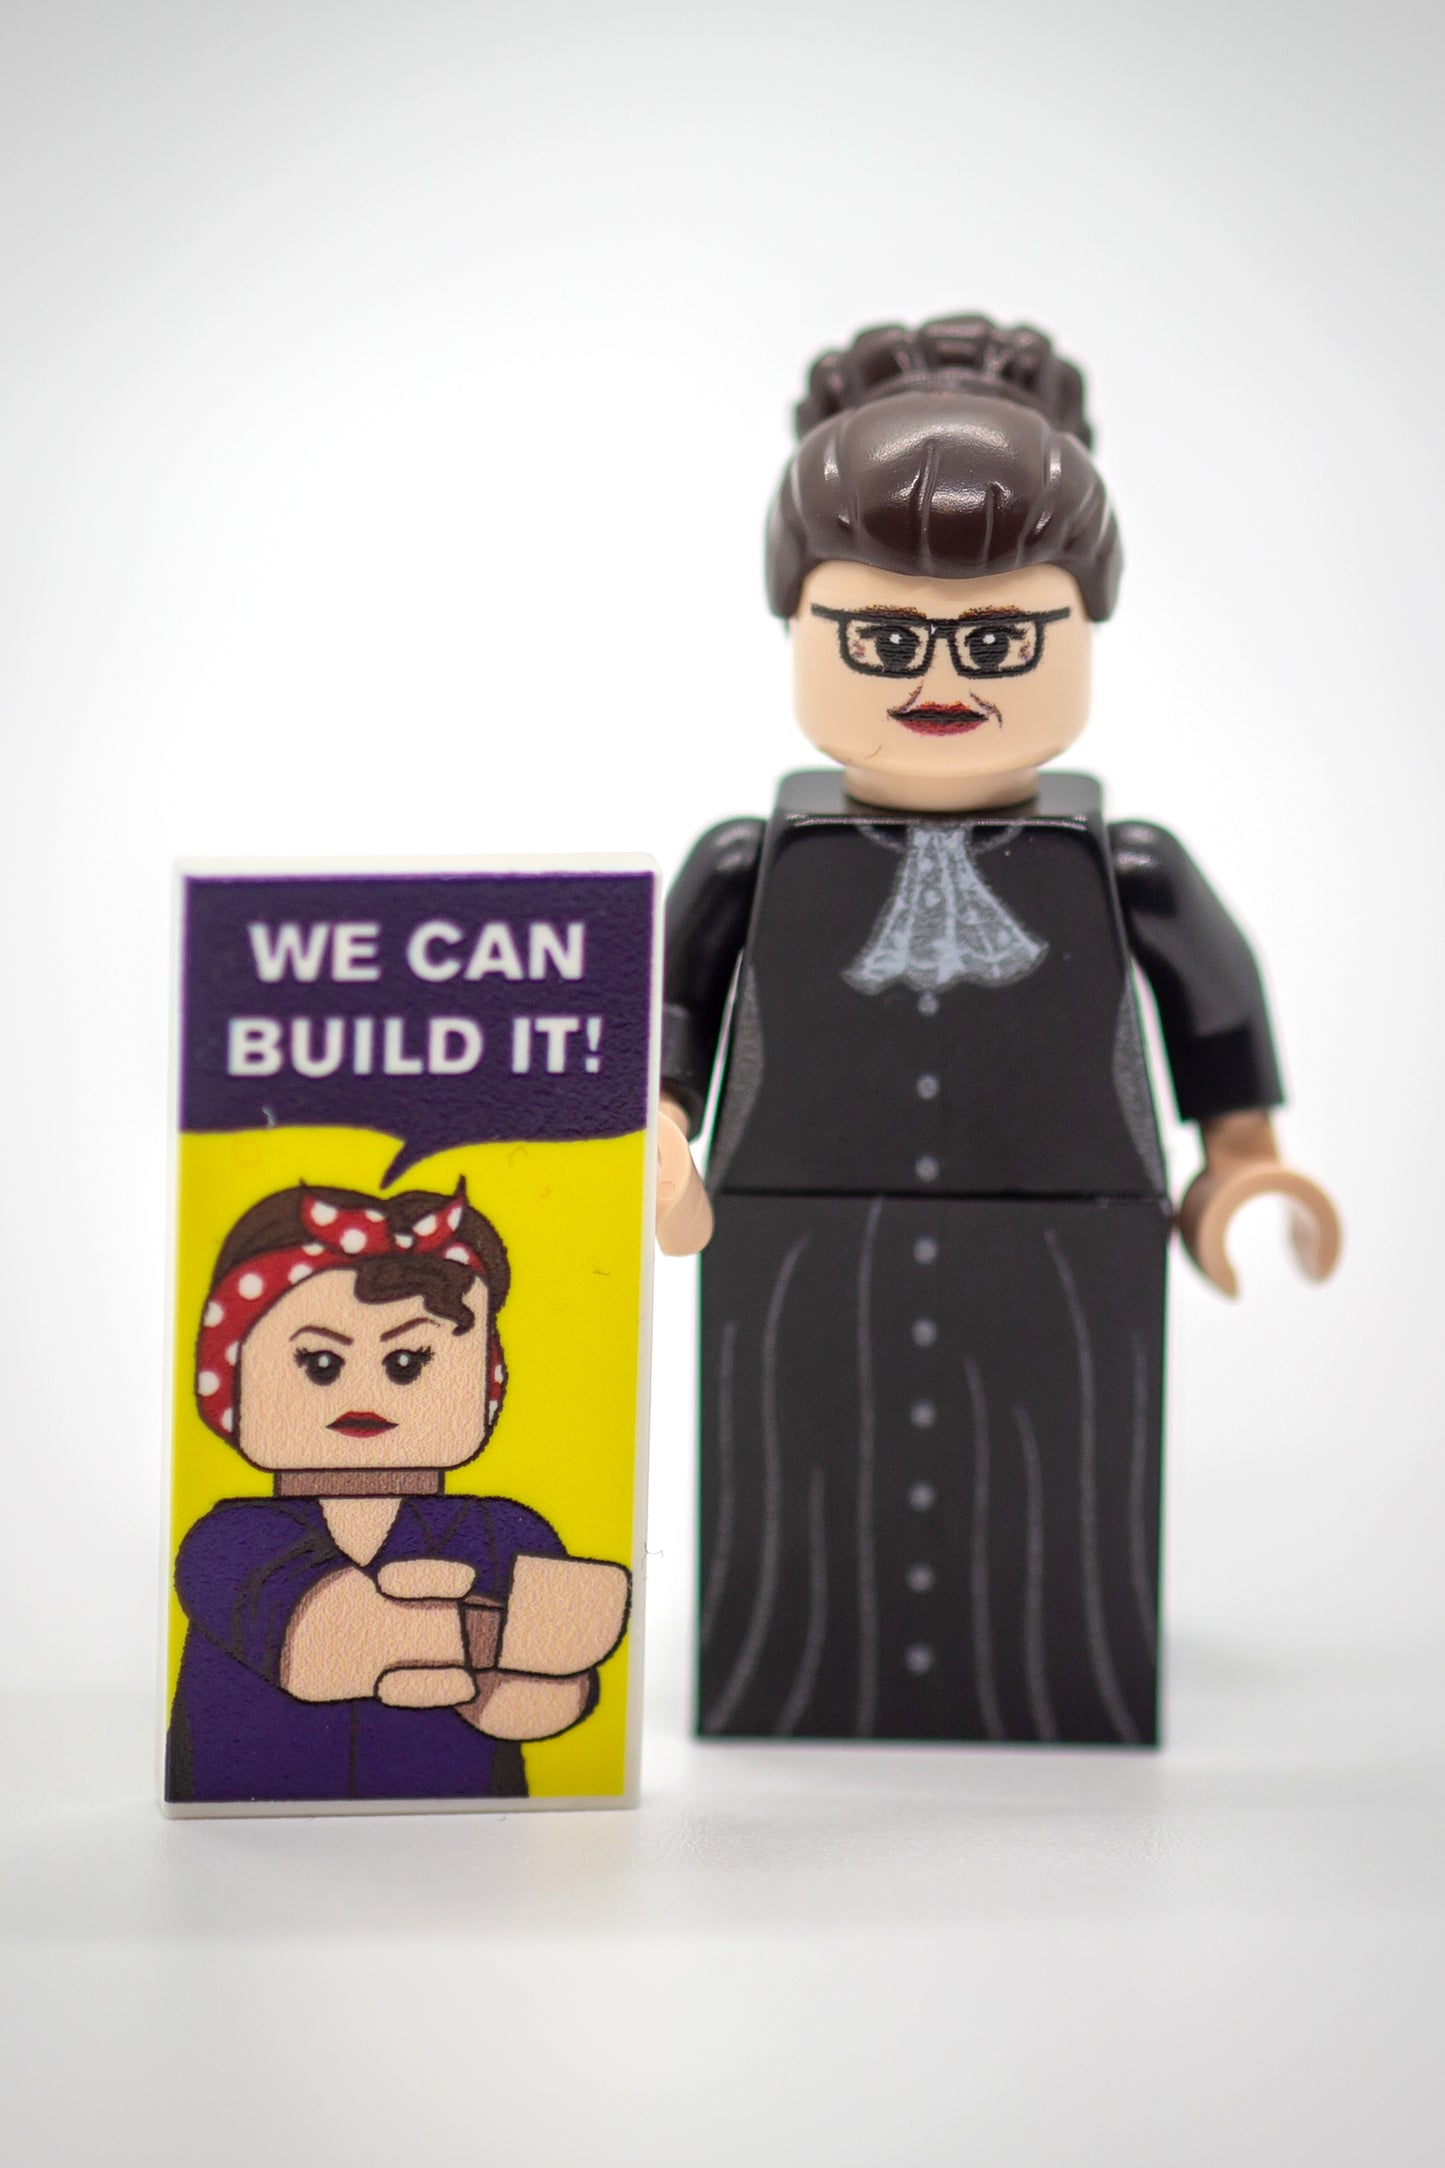 RBG WE CAN BUILD IT